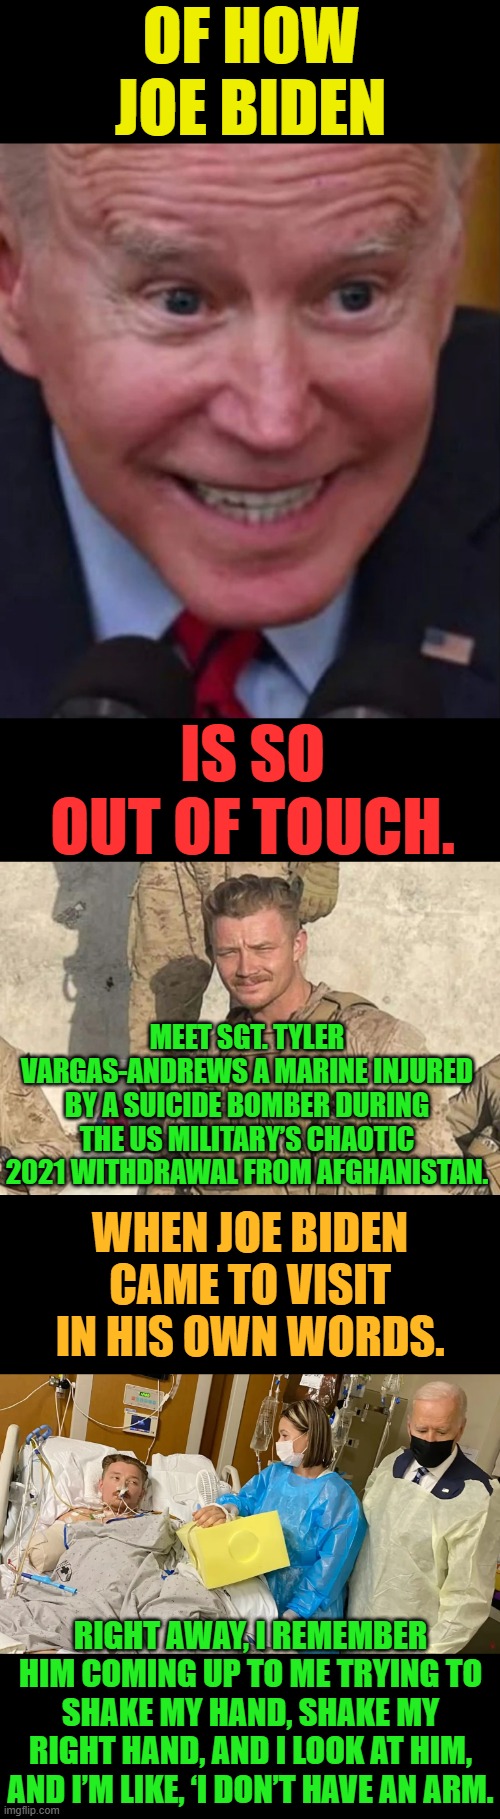 Considering There Are So Many Others...Here's Another Example | OF HOW JOE BIDEN; IS SO OUT OF TOUCH. MEET SGT. TYLER VARGAS-ANDREWS A MARINE INJURED BY A SUICIDE BOMBER DURING THE US MILITARY’S CHAOTIC 2021 WITHDRAWAL FROM AFGHANISTAN. WHEN JOE BIDEN CAME TO VISIT IN HIS OWN WORDS. RIGHT AWAY, I REMEMBER HIM COMING UP TO ME TRYING TO SHAKE MY HAND, SHAKE MY RIGHT HAND, AND I LOOK AT HIM, AND I’M LIKE, ‘I DON’T HAVE AN ARM. | image tagged in memes,politics,marine,joe biden,out of touch,everything | made w/ Imgflip meme maker